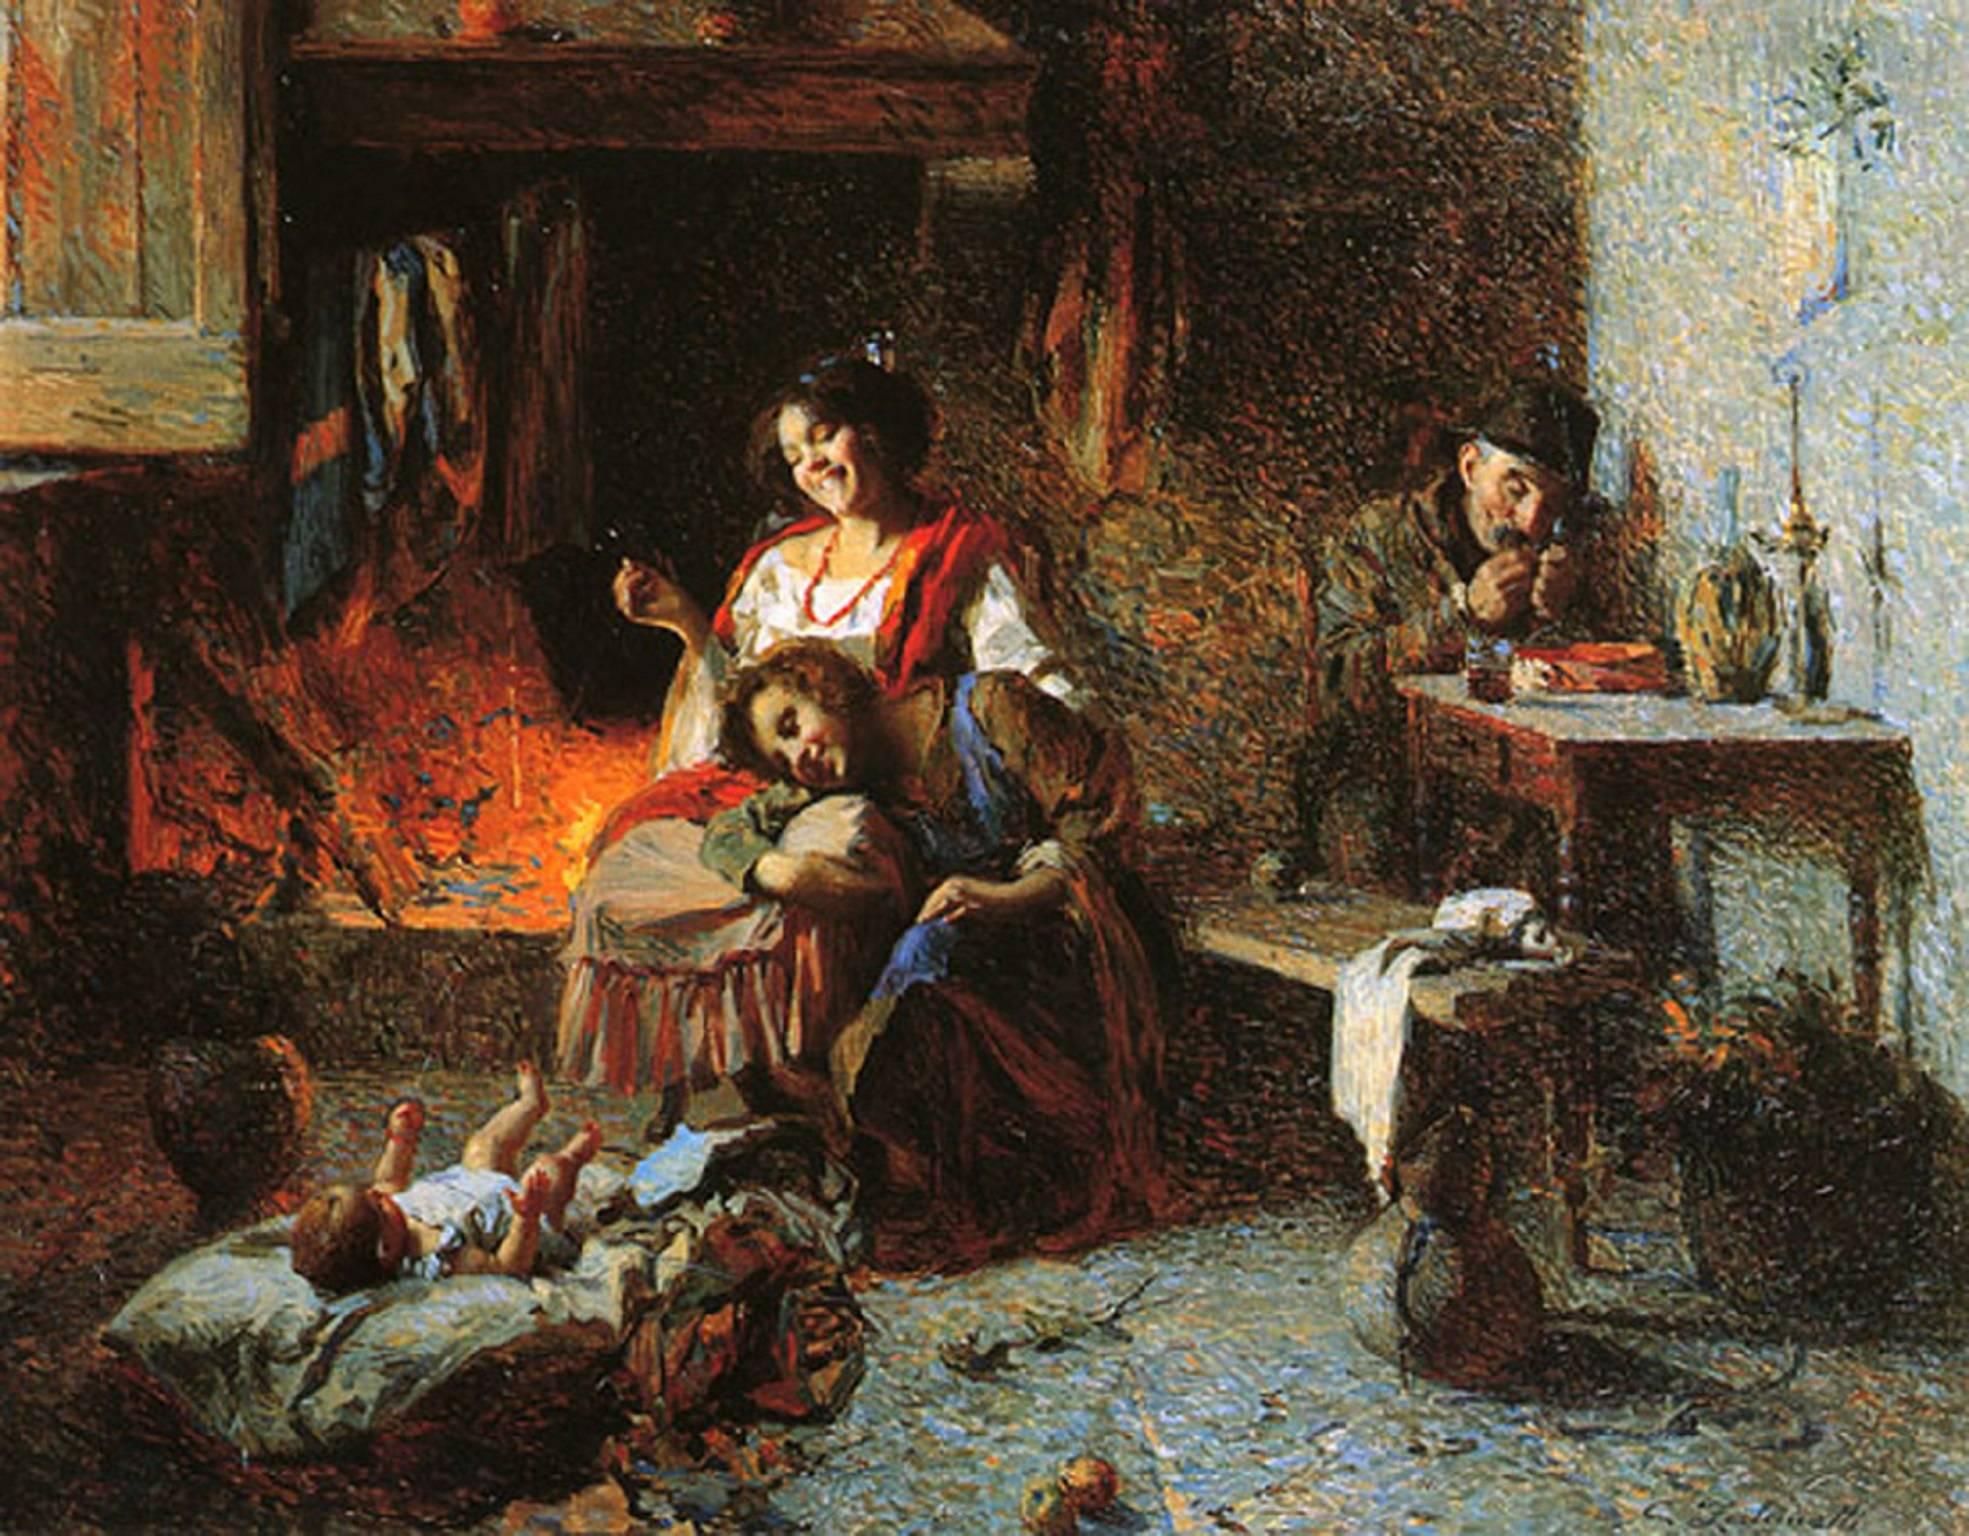 Carlo Facchinetti Interior Painting - Happy Hours in the Family. Oil Landscape Painting, 19th century Italian, Realism